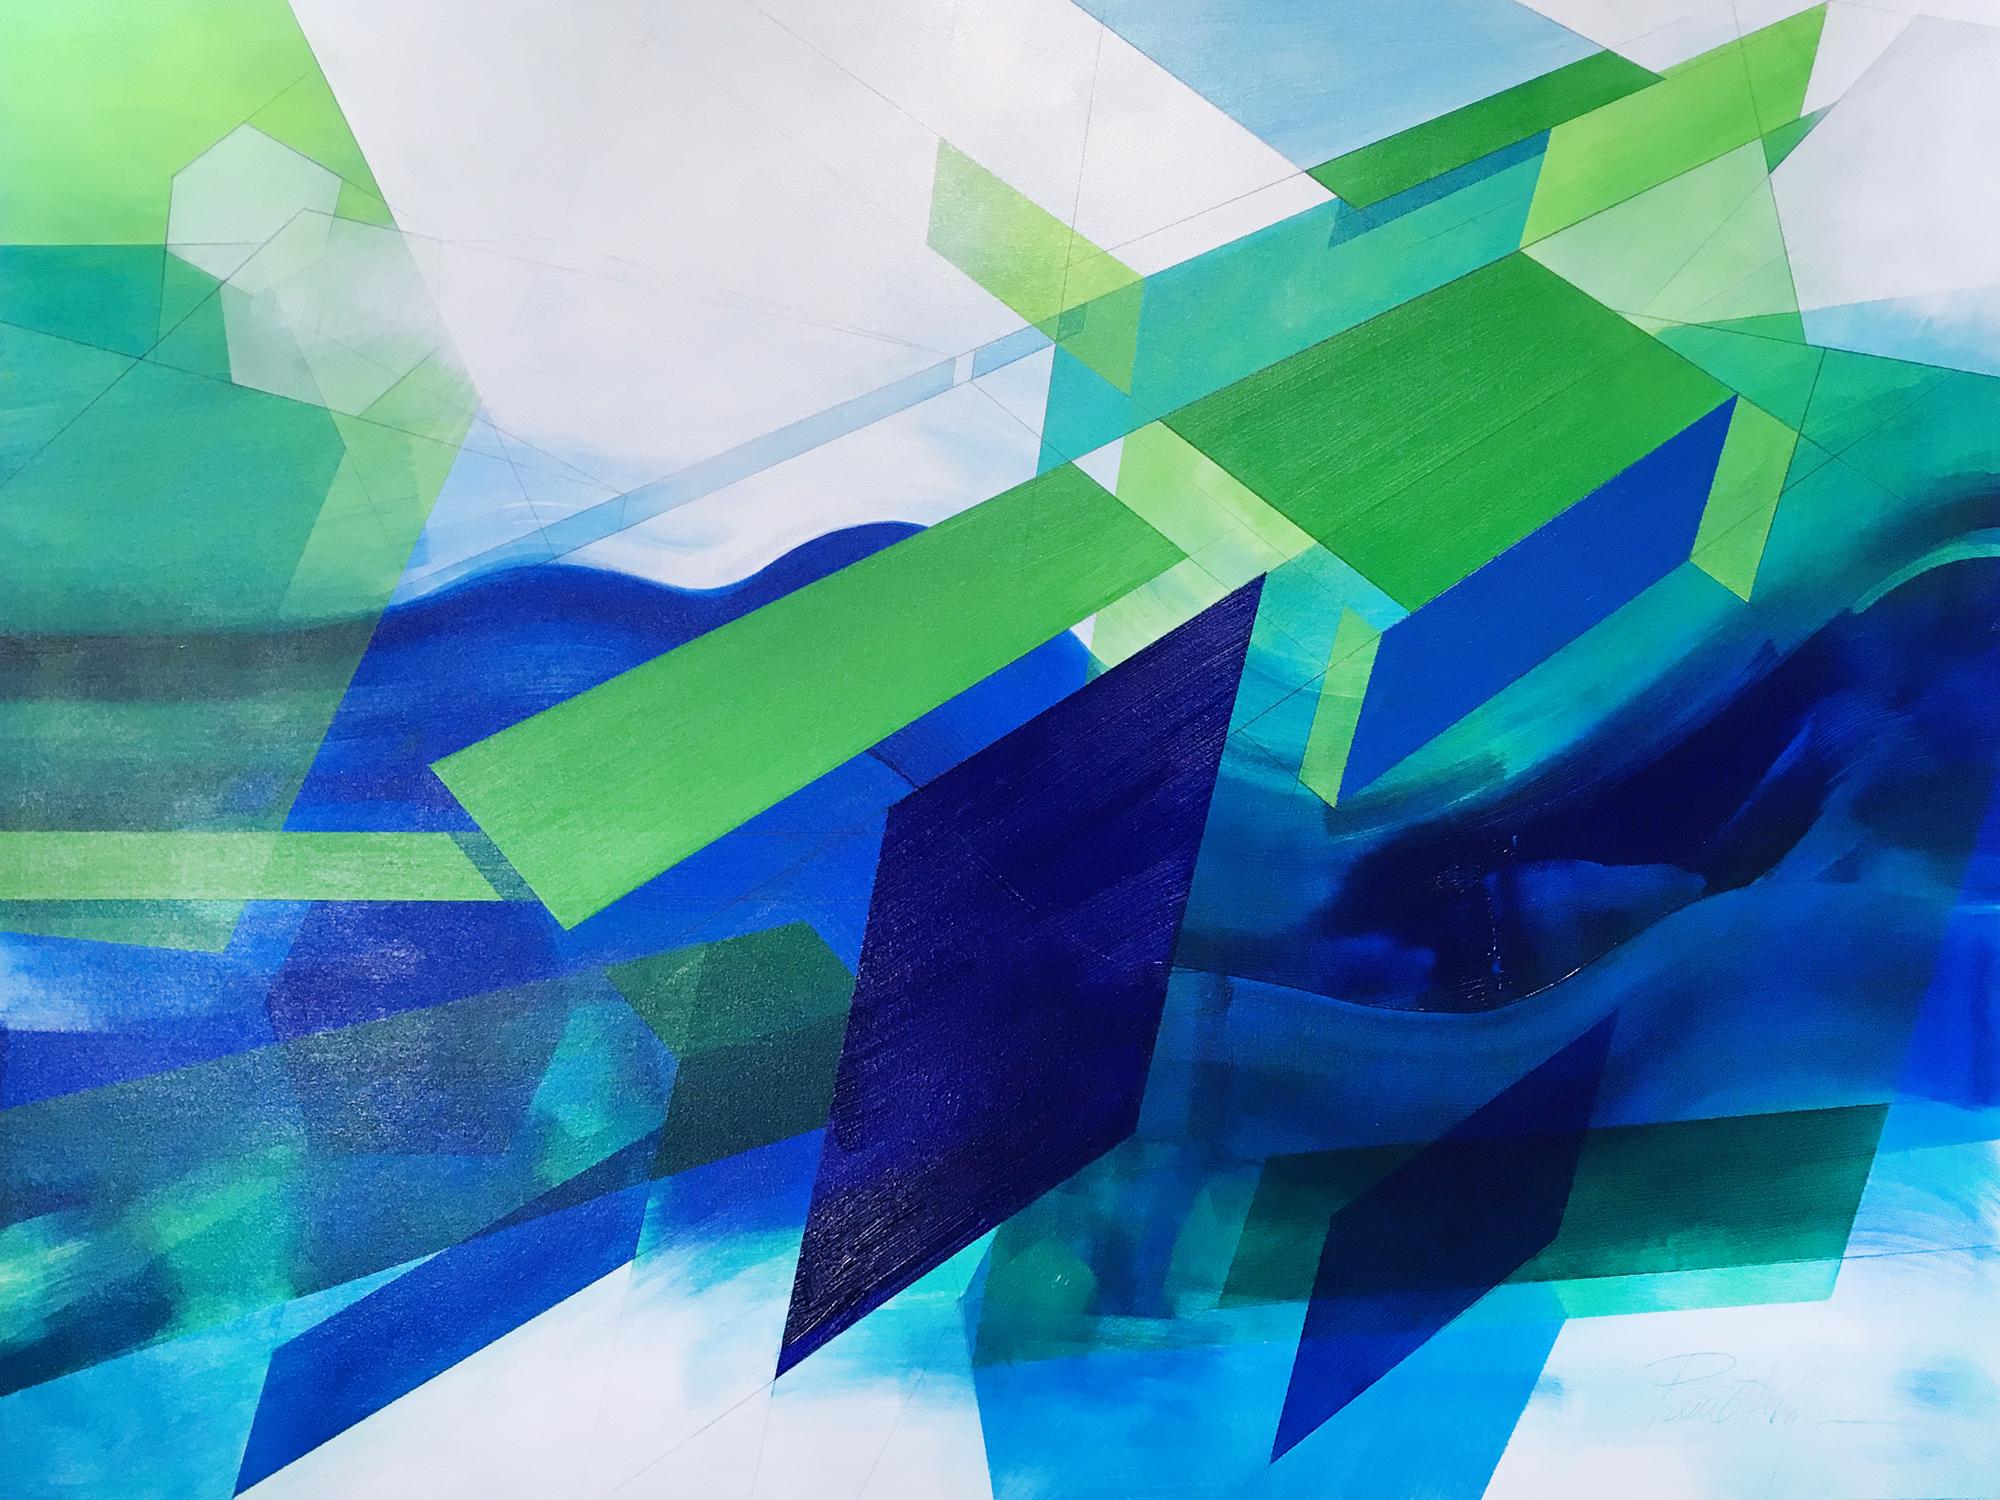 <p>Artist Comments<br />Abstract Landscape 72 has a strong architectural influence combined with a cool blue and green color palette. </p><br /><p>About the Artist<br />Born in Massachusetts into a family of architects, designers and artists, Paul